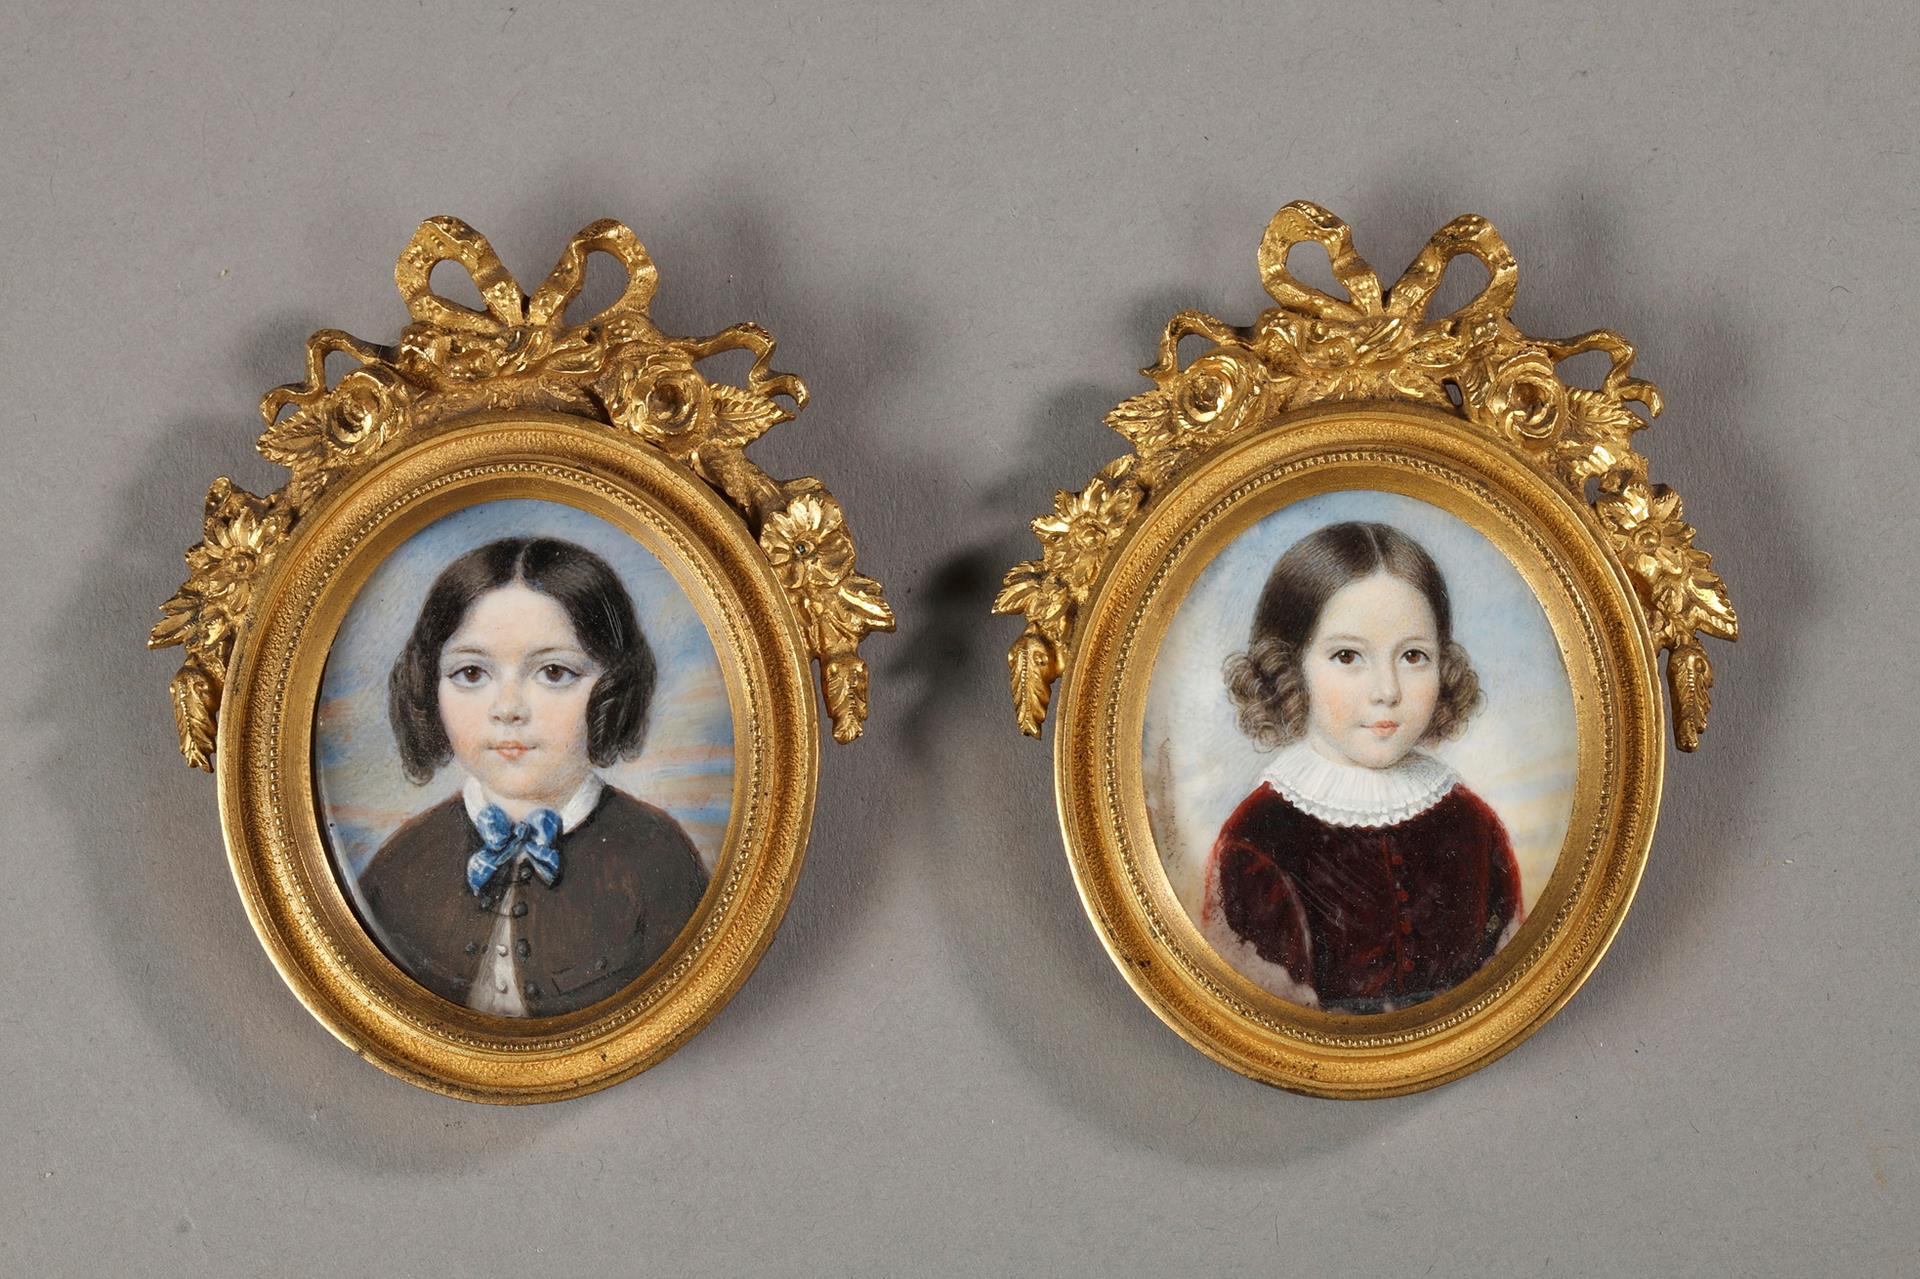 Pair of miniature on ivory. Gilt bronze frame. <br/>
Early 19th century.